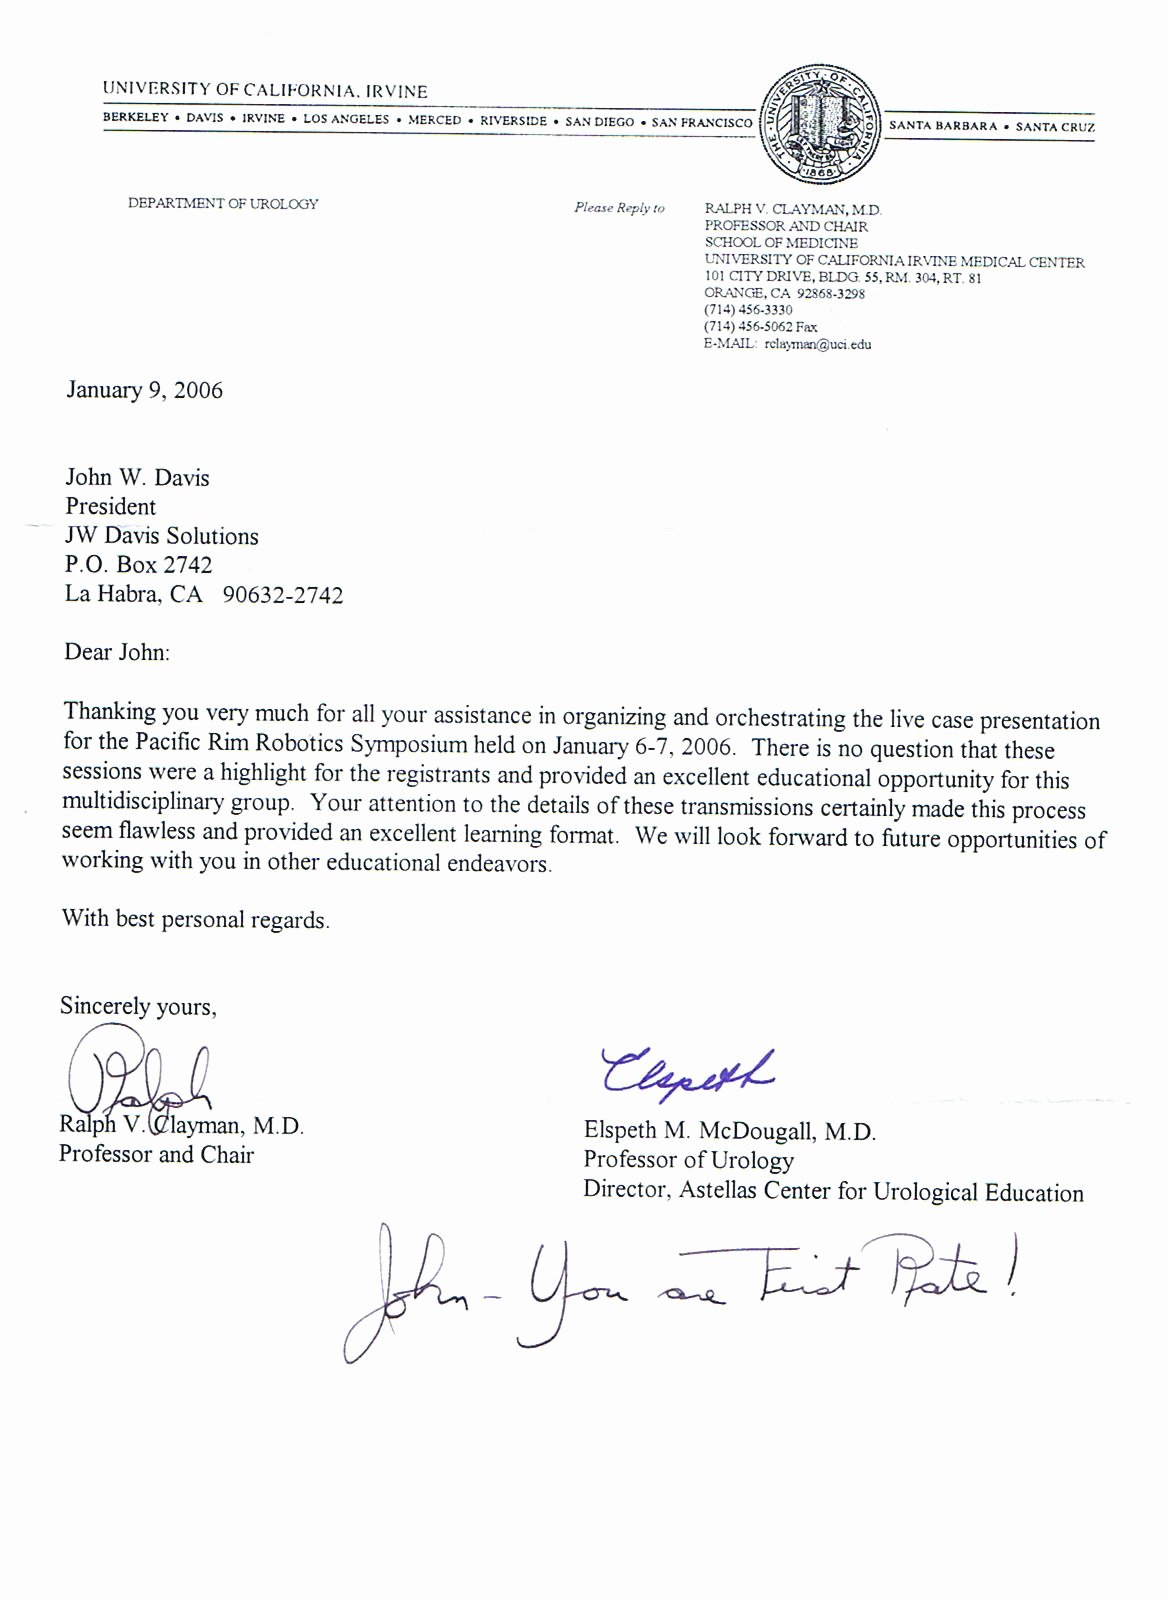 Uci Letter Of Recommendation Inspirational Letter From the University Of California Medical Center